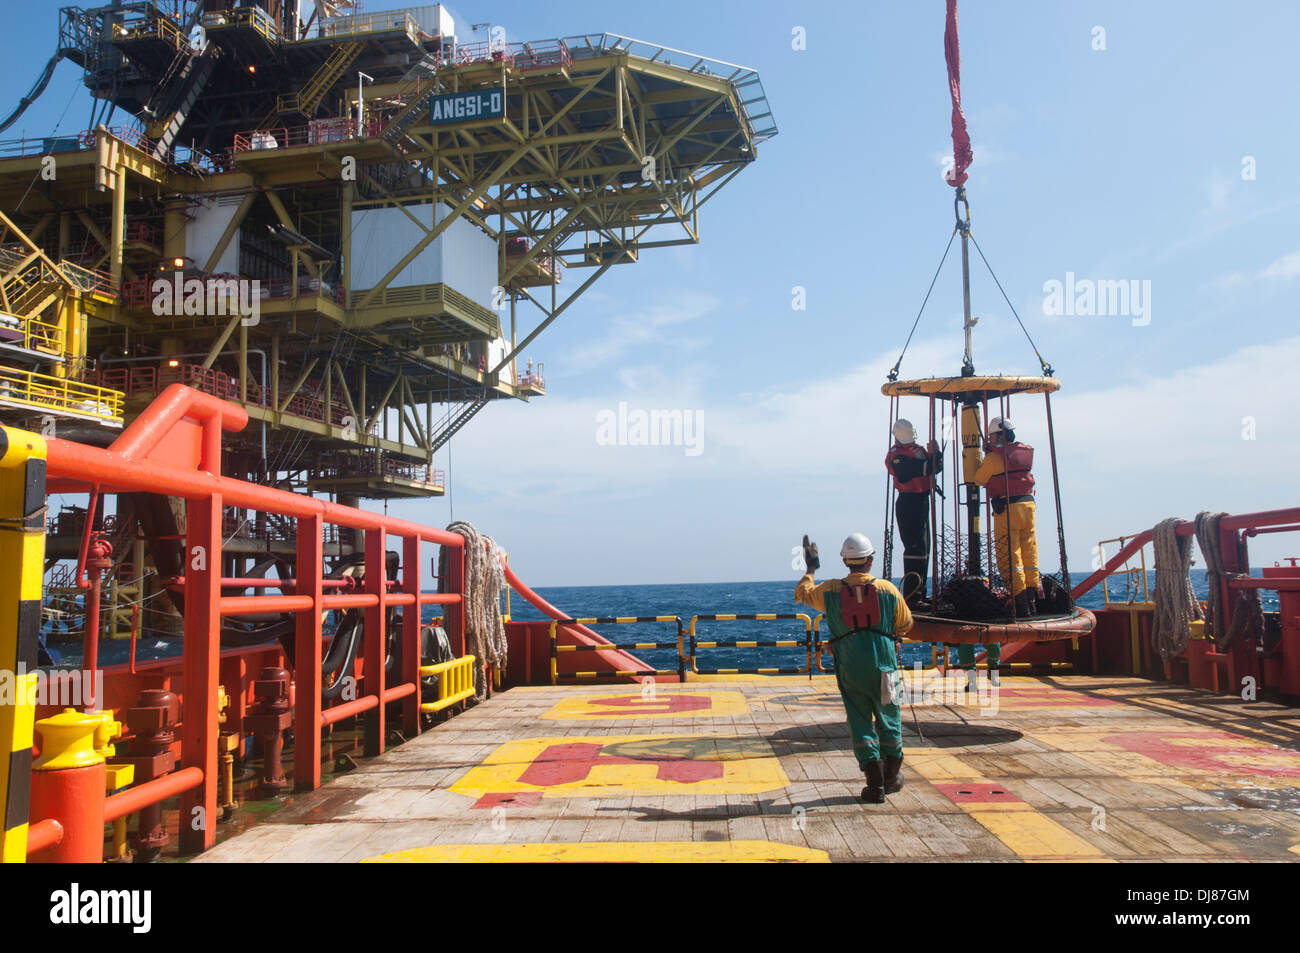 vessel able seaman or marine crew working on deck for platform crew transfer using safety basket Stock Photo